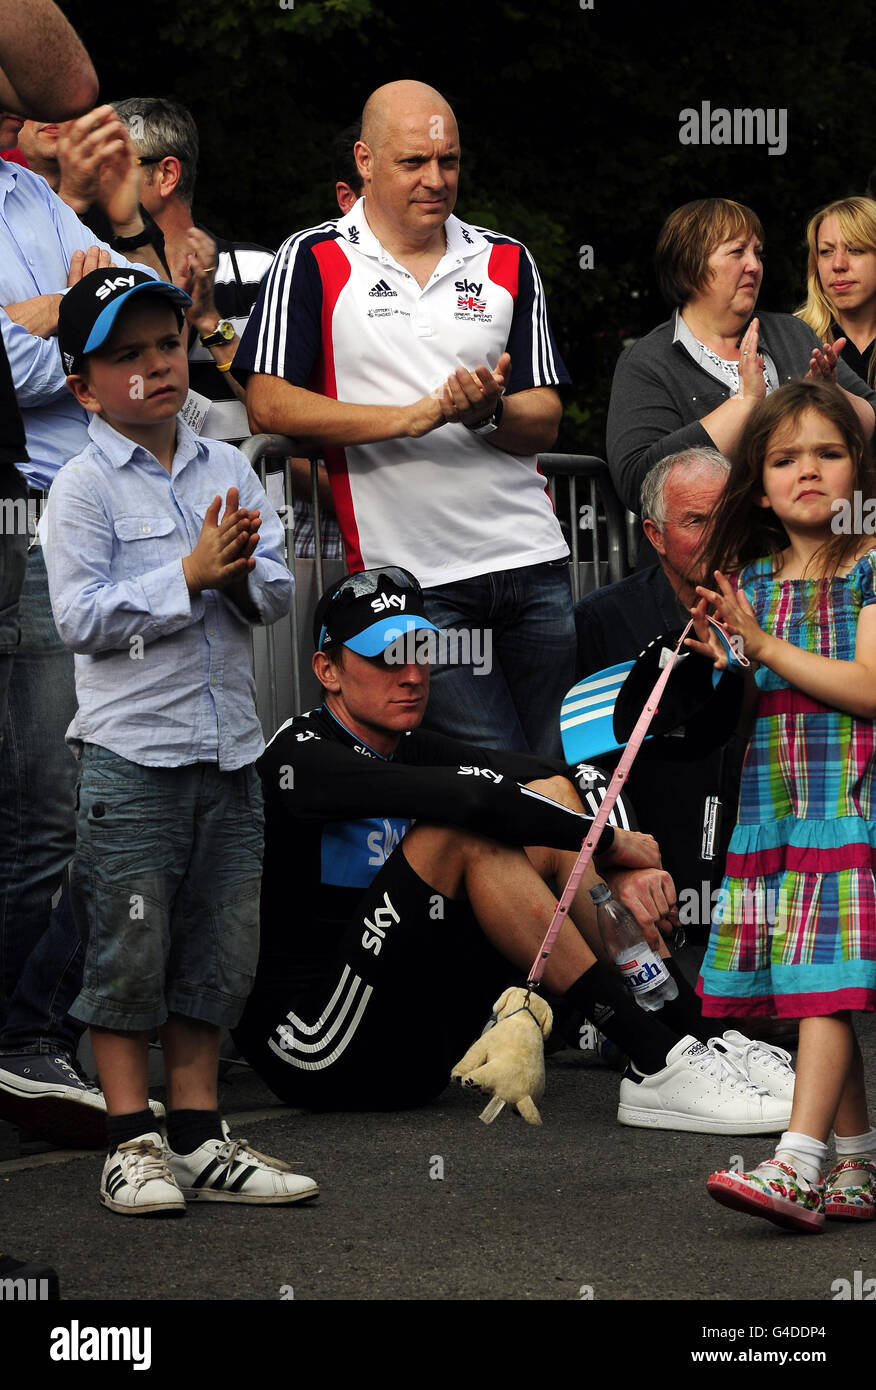 Bradley Wiggins of the Sky Cycling Team with Team Principal Dave Brailsford and his children Ben and Isabella as he waits to receive his National Champions Jersey following his victory in the Mens National Elite Road Race Championships in Stamfordham. Stock Photo